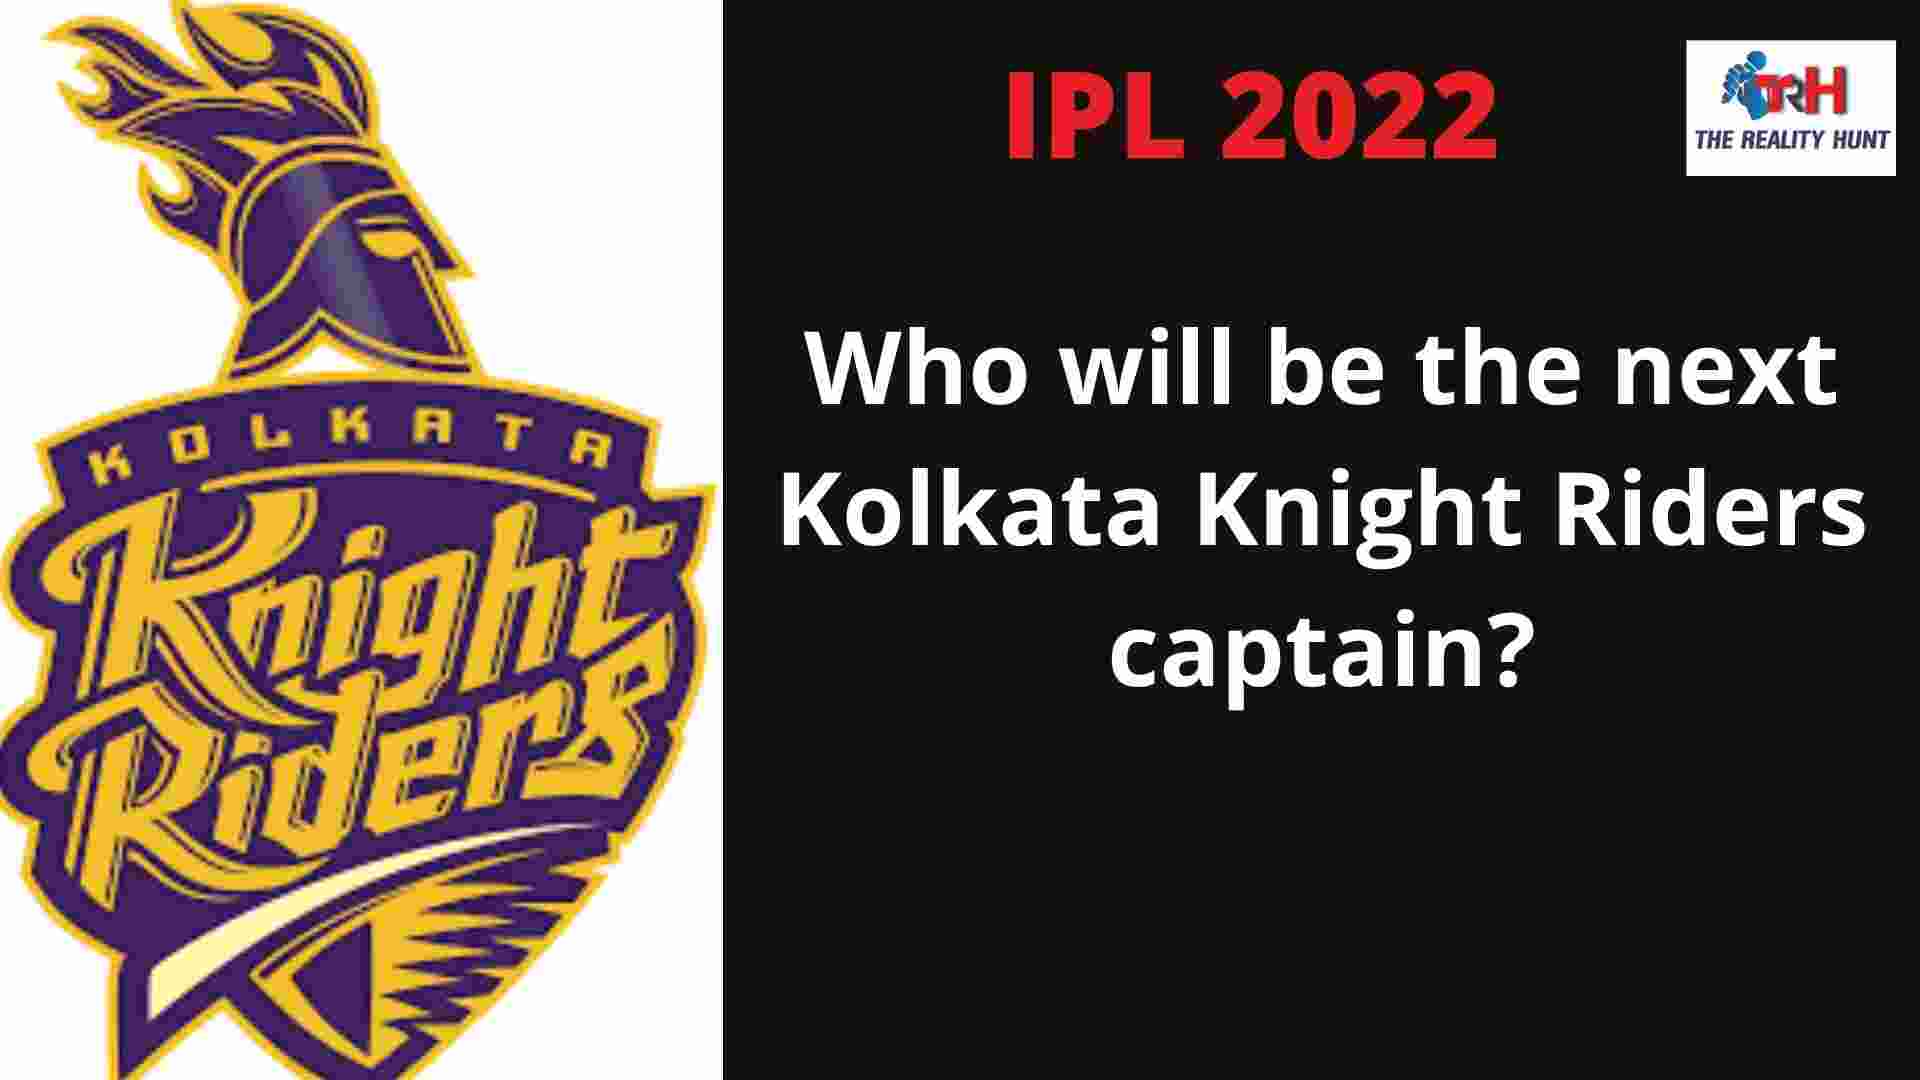 IPL 2022: Who will be the next Kolkata Knight Riders captain? Discover the 2 best contenders